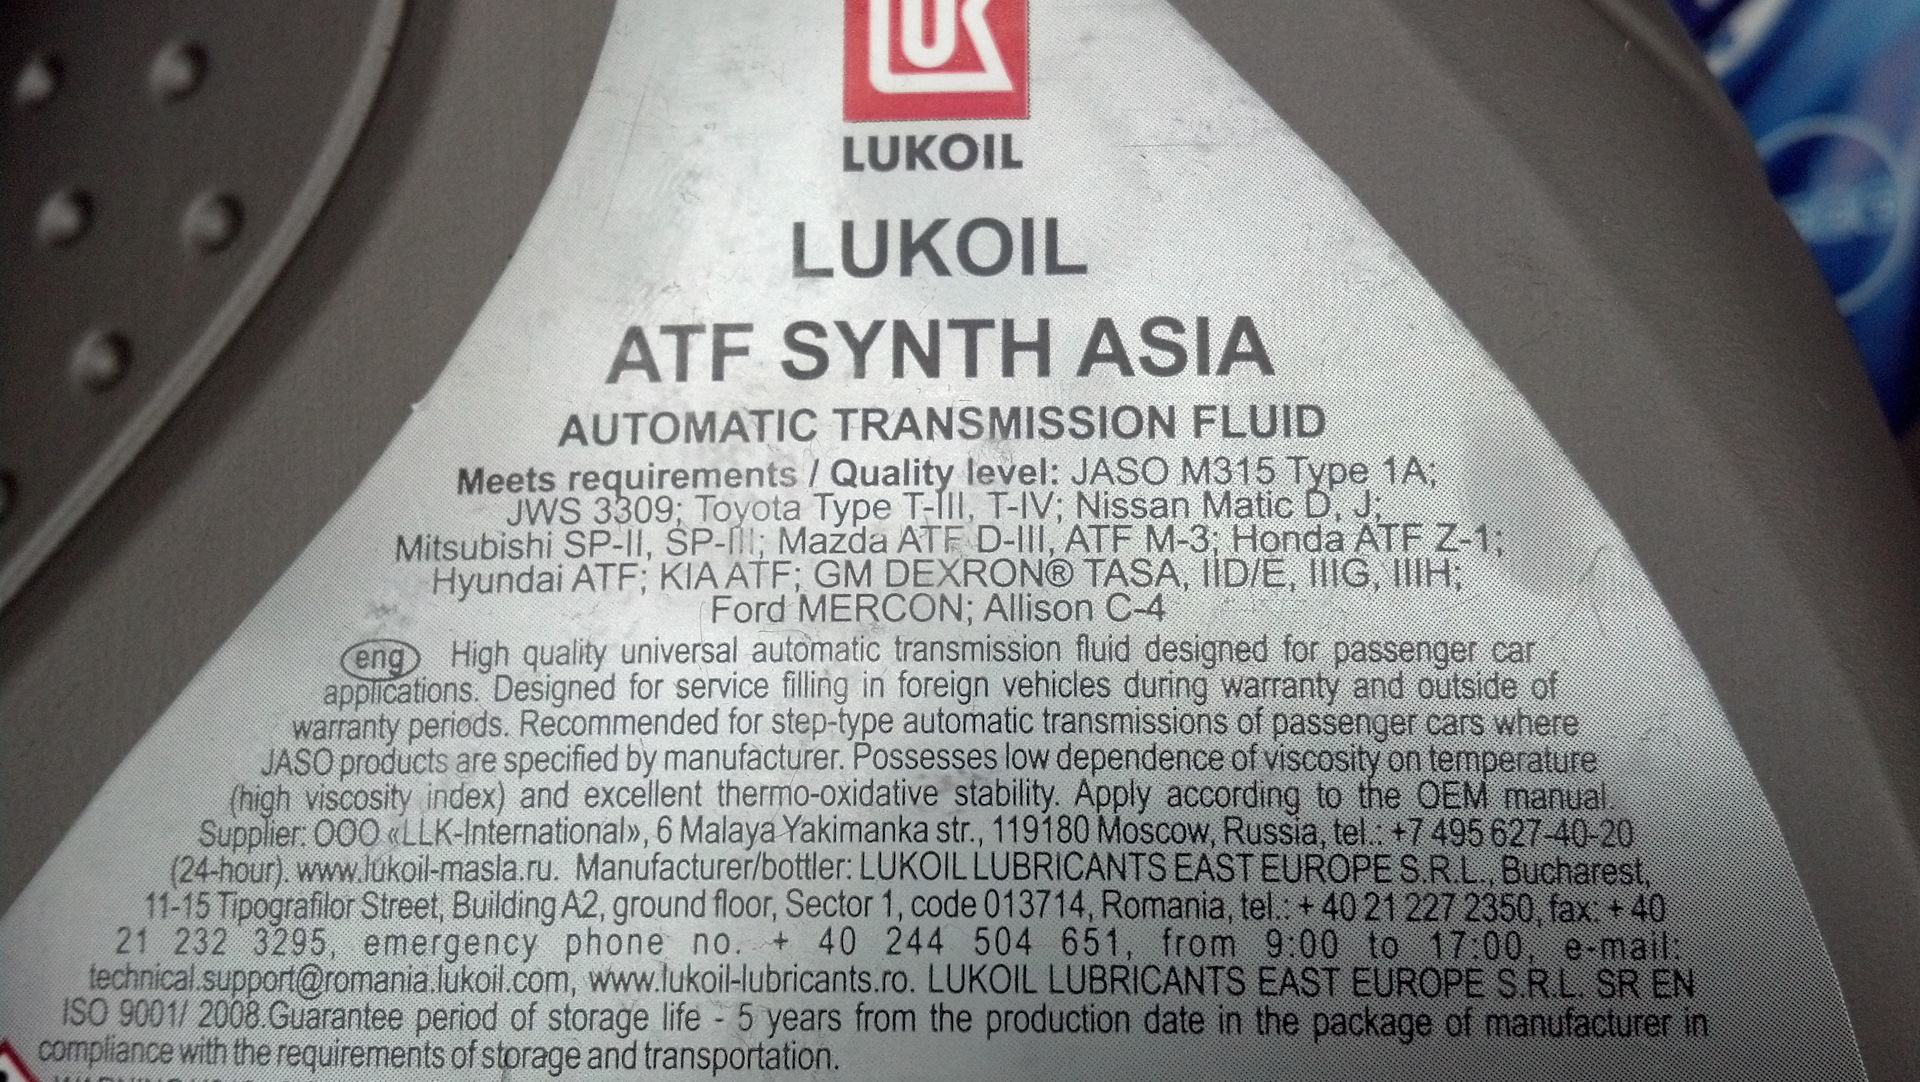 Atf synth multi. Lukoil ATF Synth 15. Lukoil ATF Synth m 15. Лукойл ATF Synth m 14. Лукойл ATF Synth Asia.